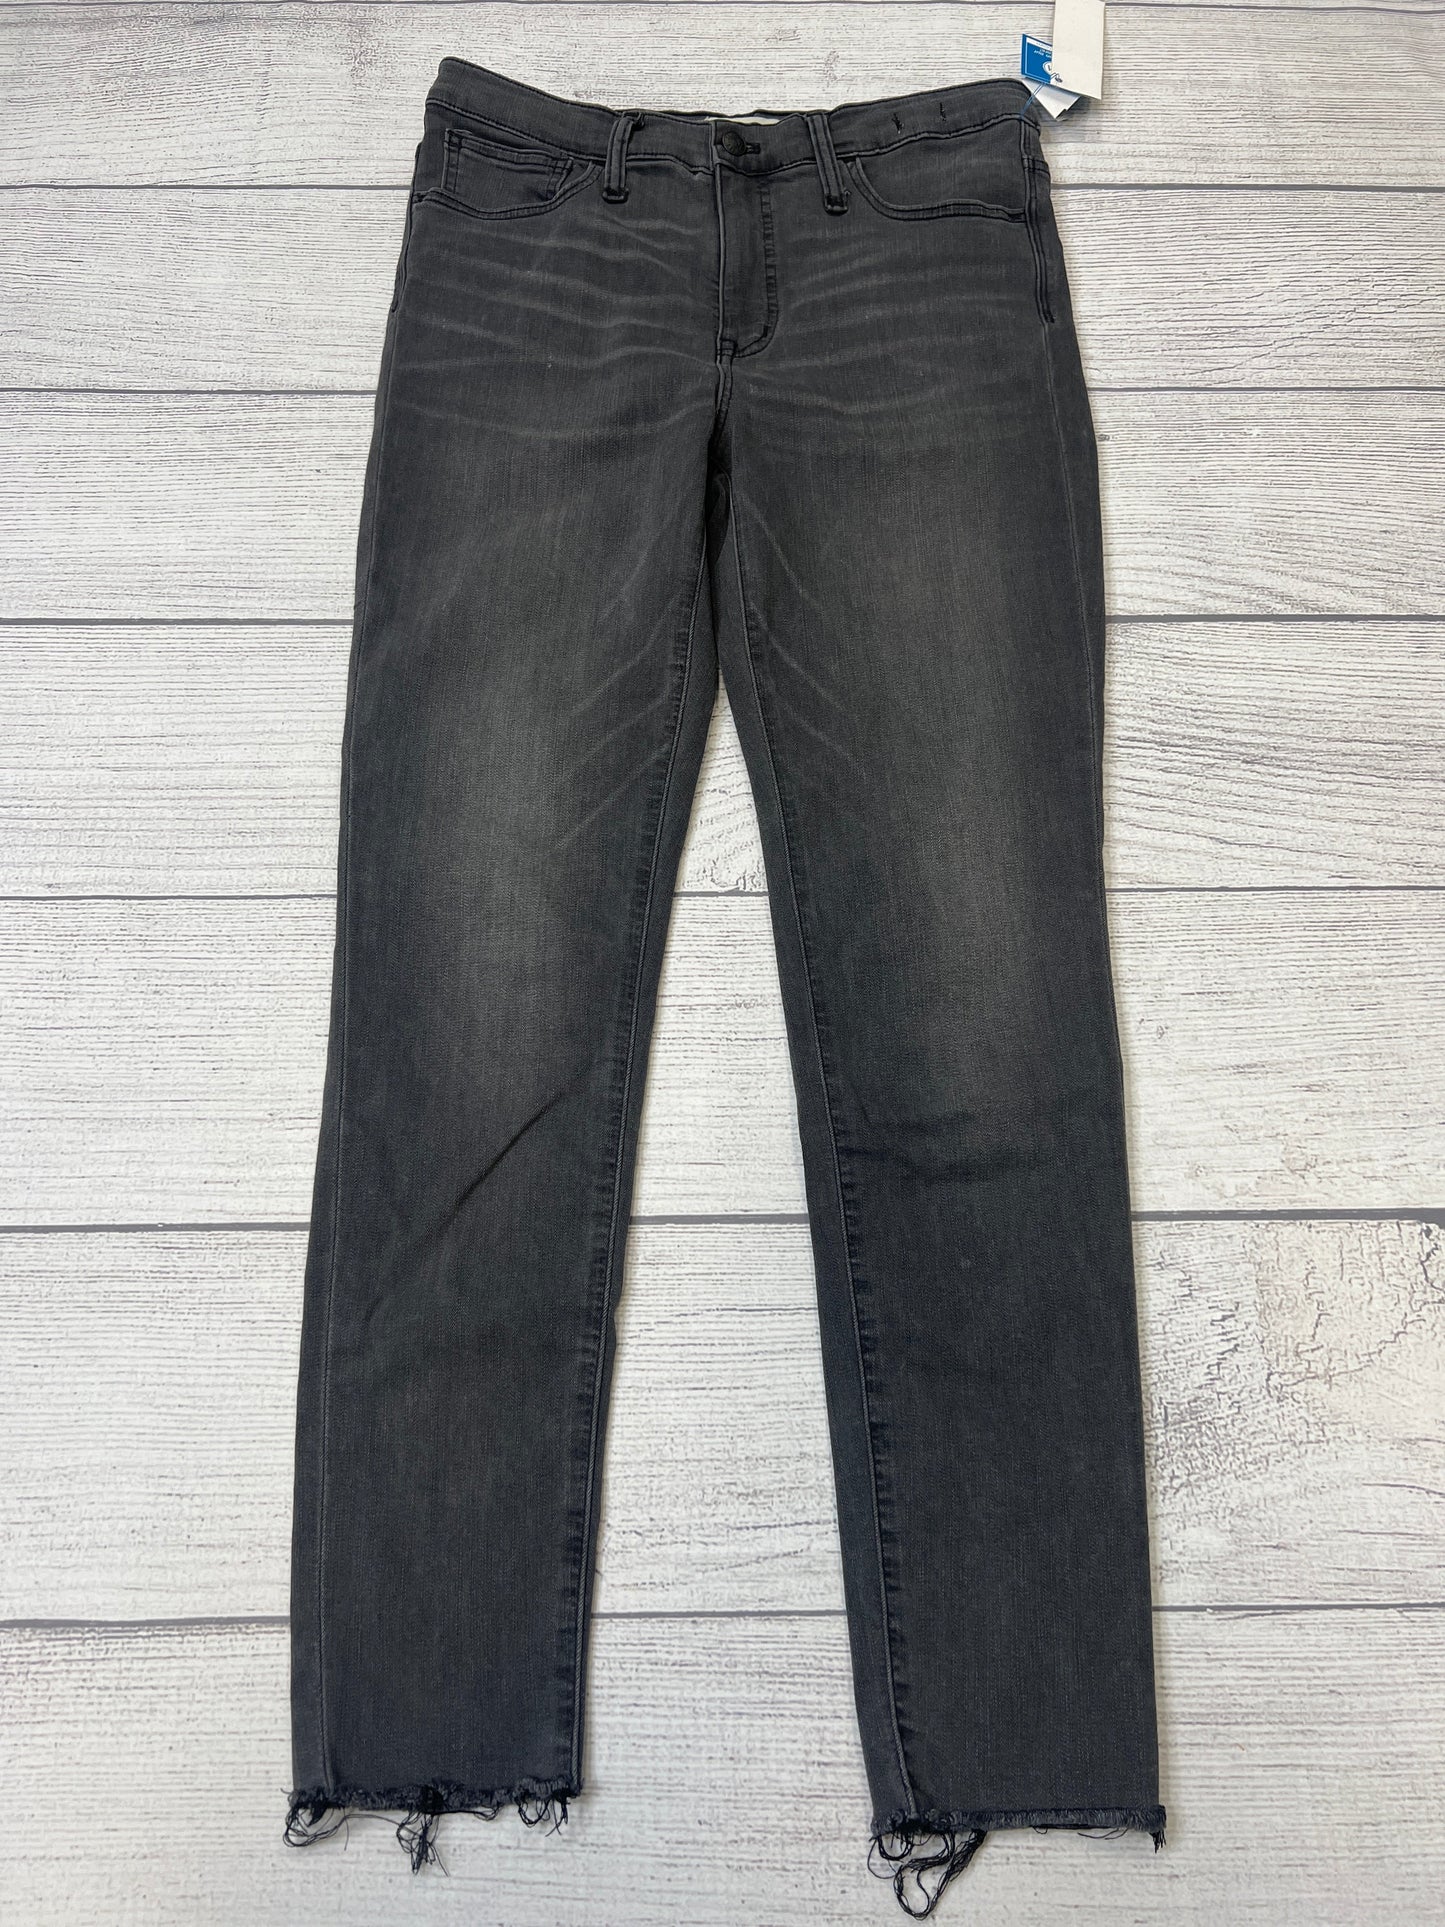 Jeans Designer By Madewell  Size: 10